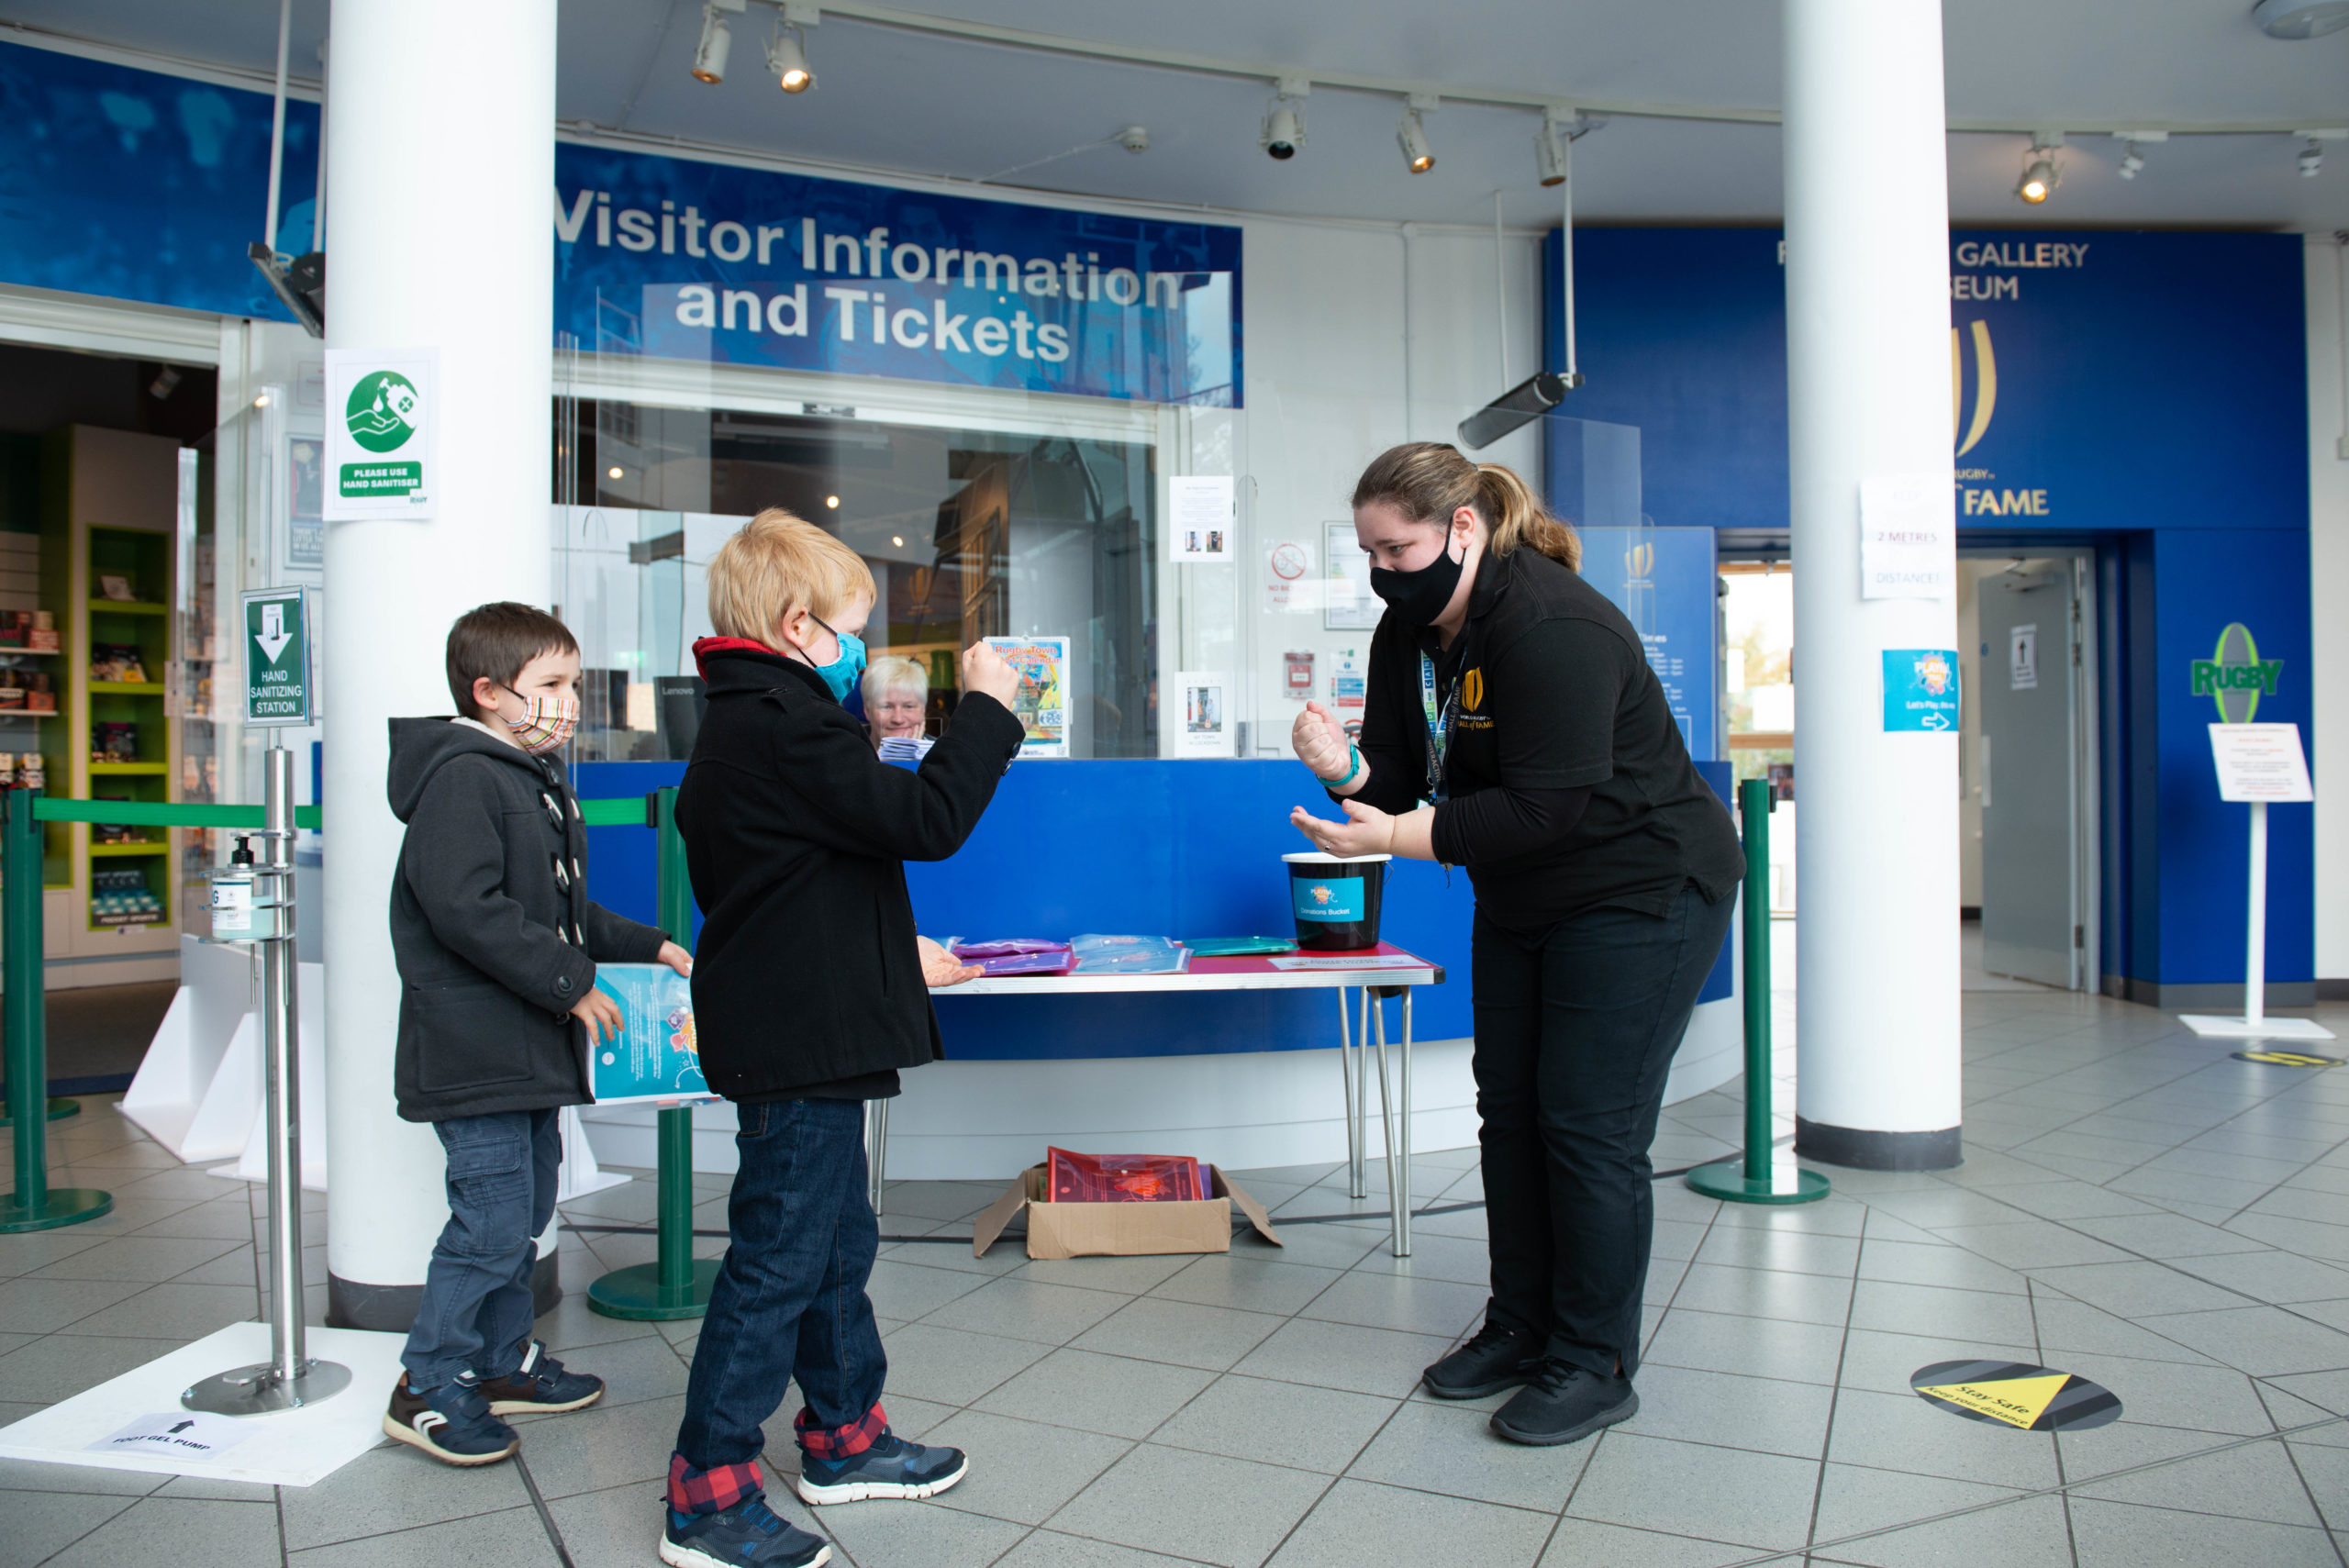 A museum staff member plays rock paper scissors with two young boys in the entrance hall of Rugby museum.